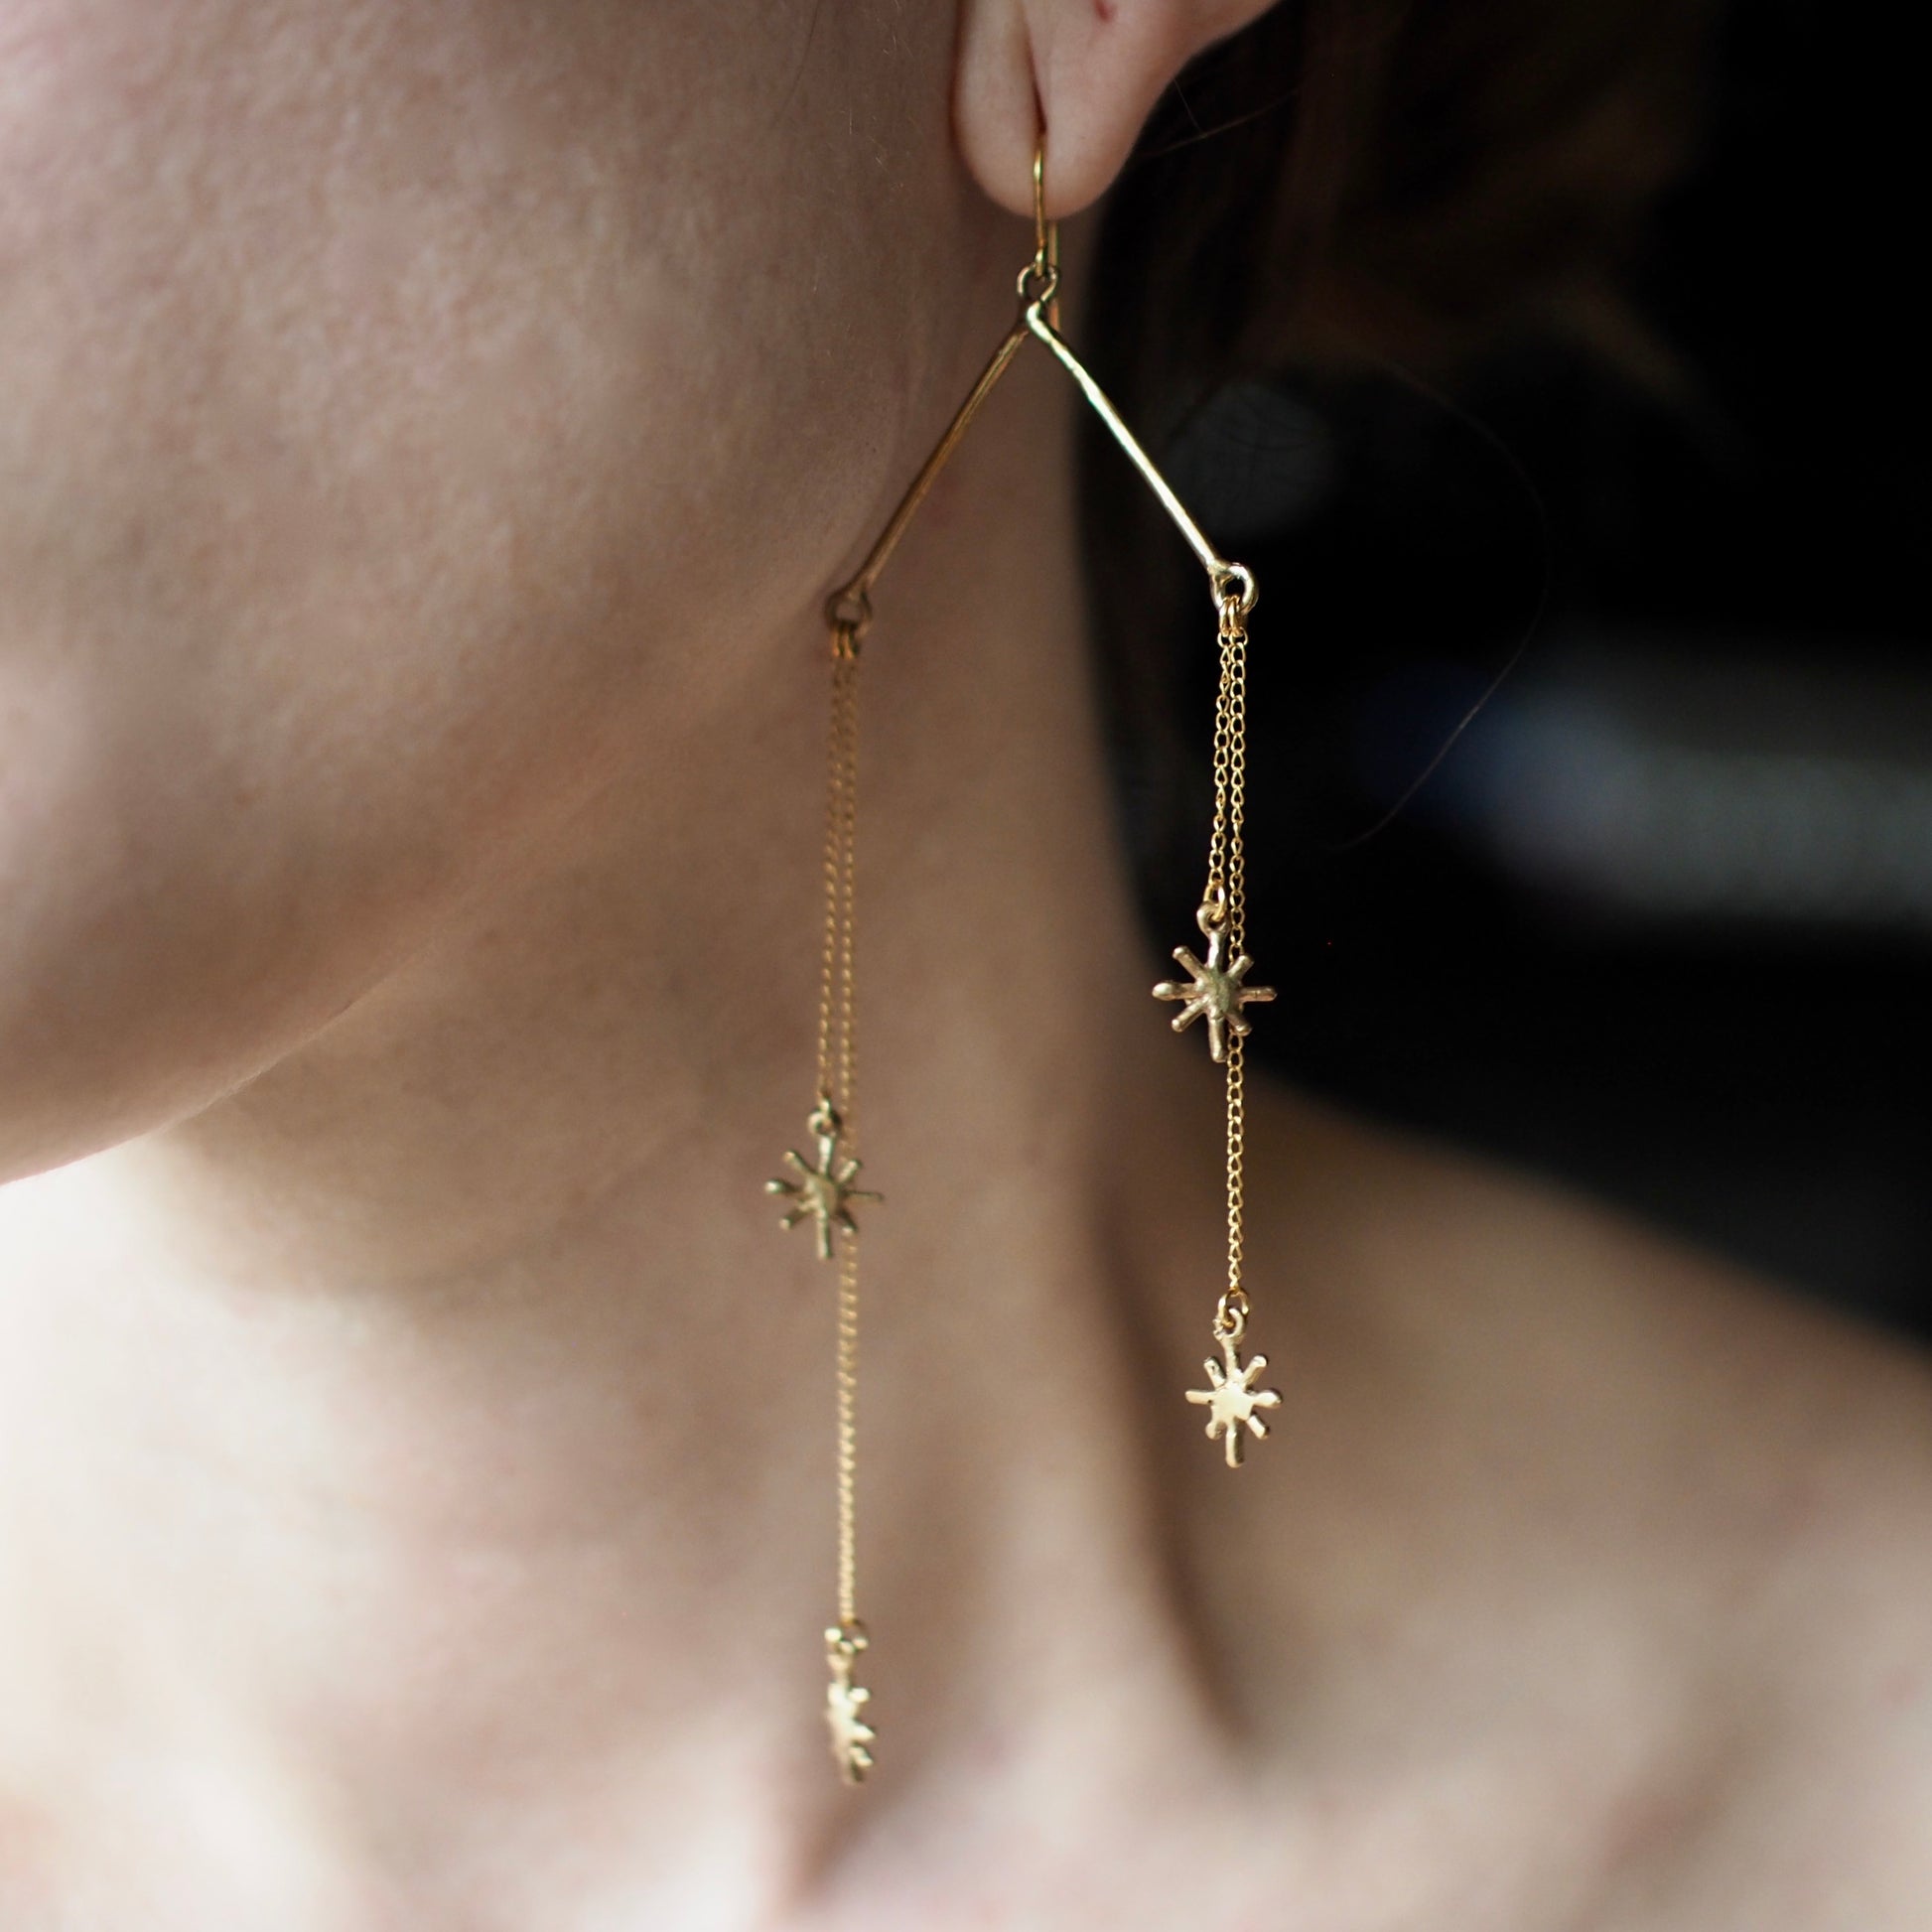 Falling star chain earrings with glitter motifs by Iron Oxide Designs on a model